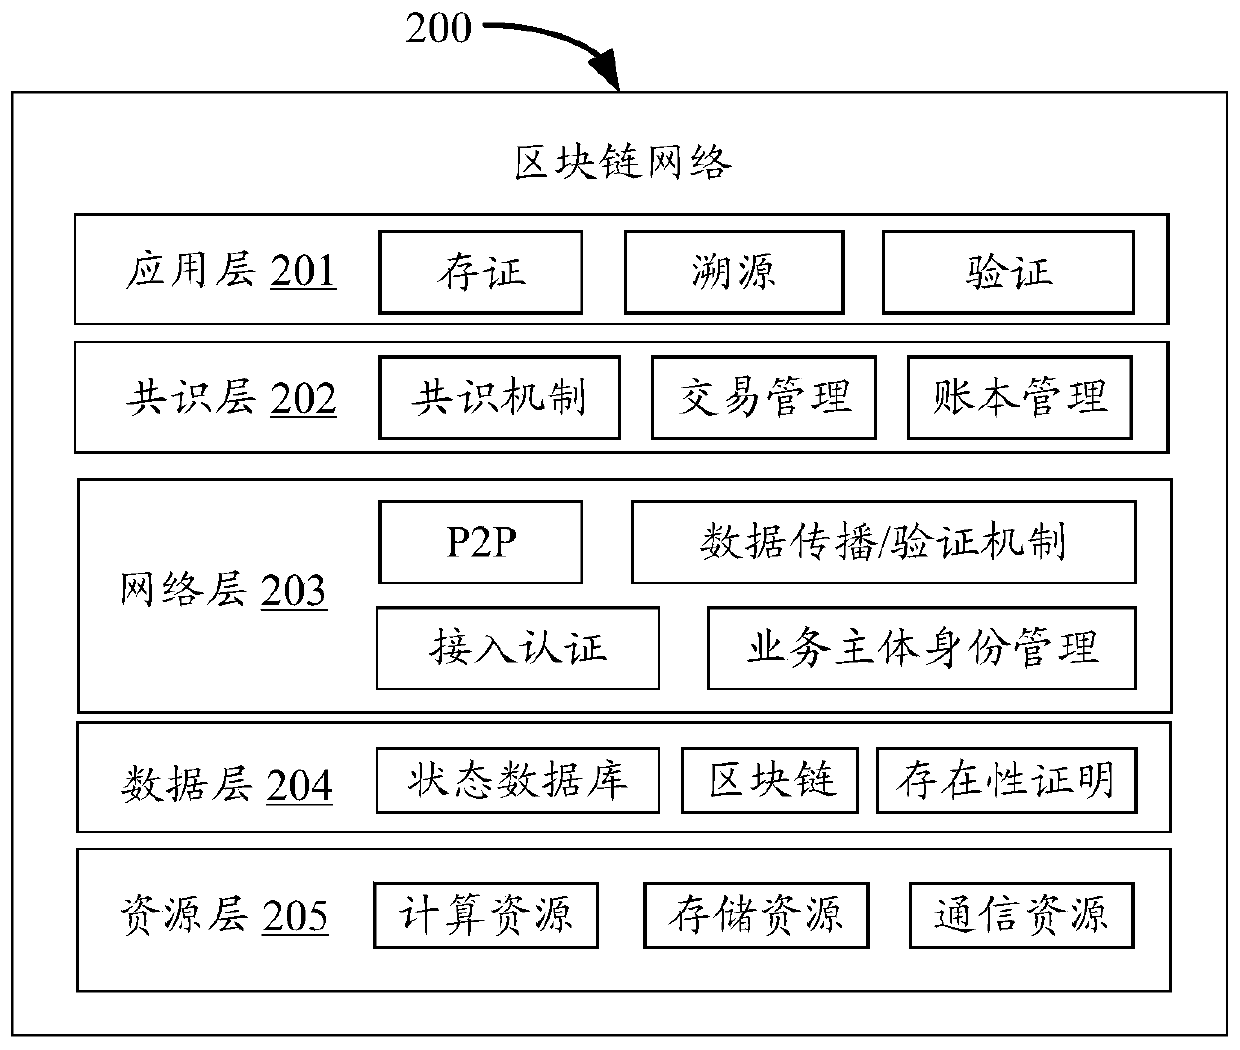 Article management method and device based on blockchain network and electronic equipment